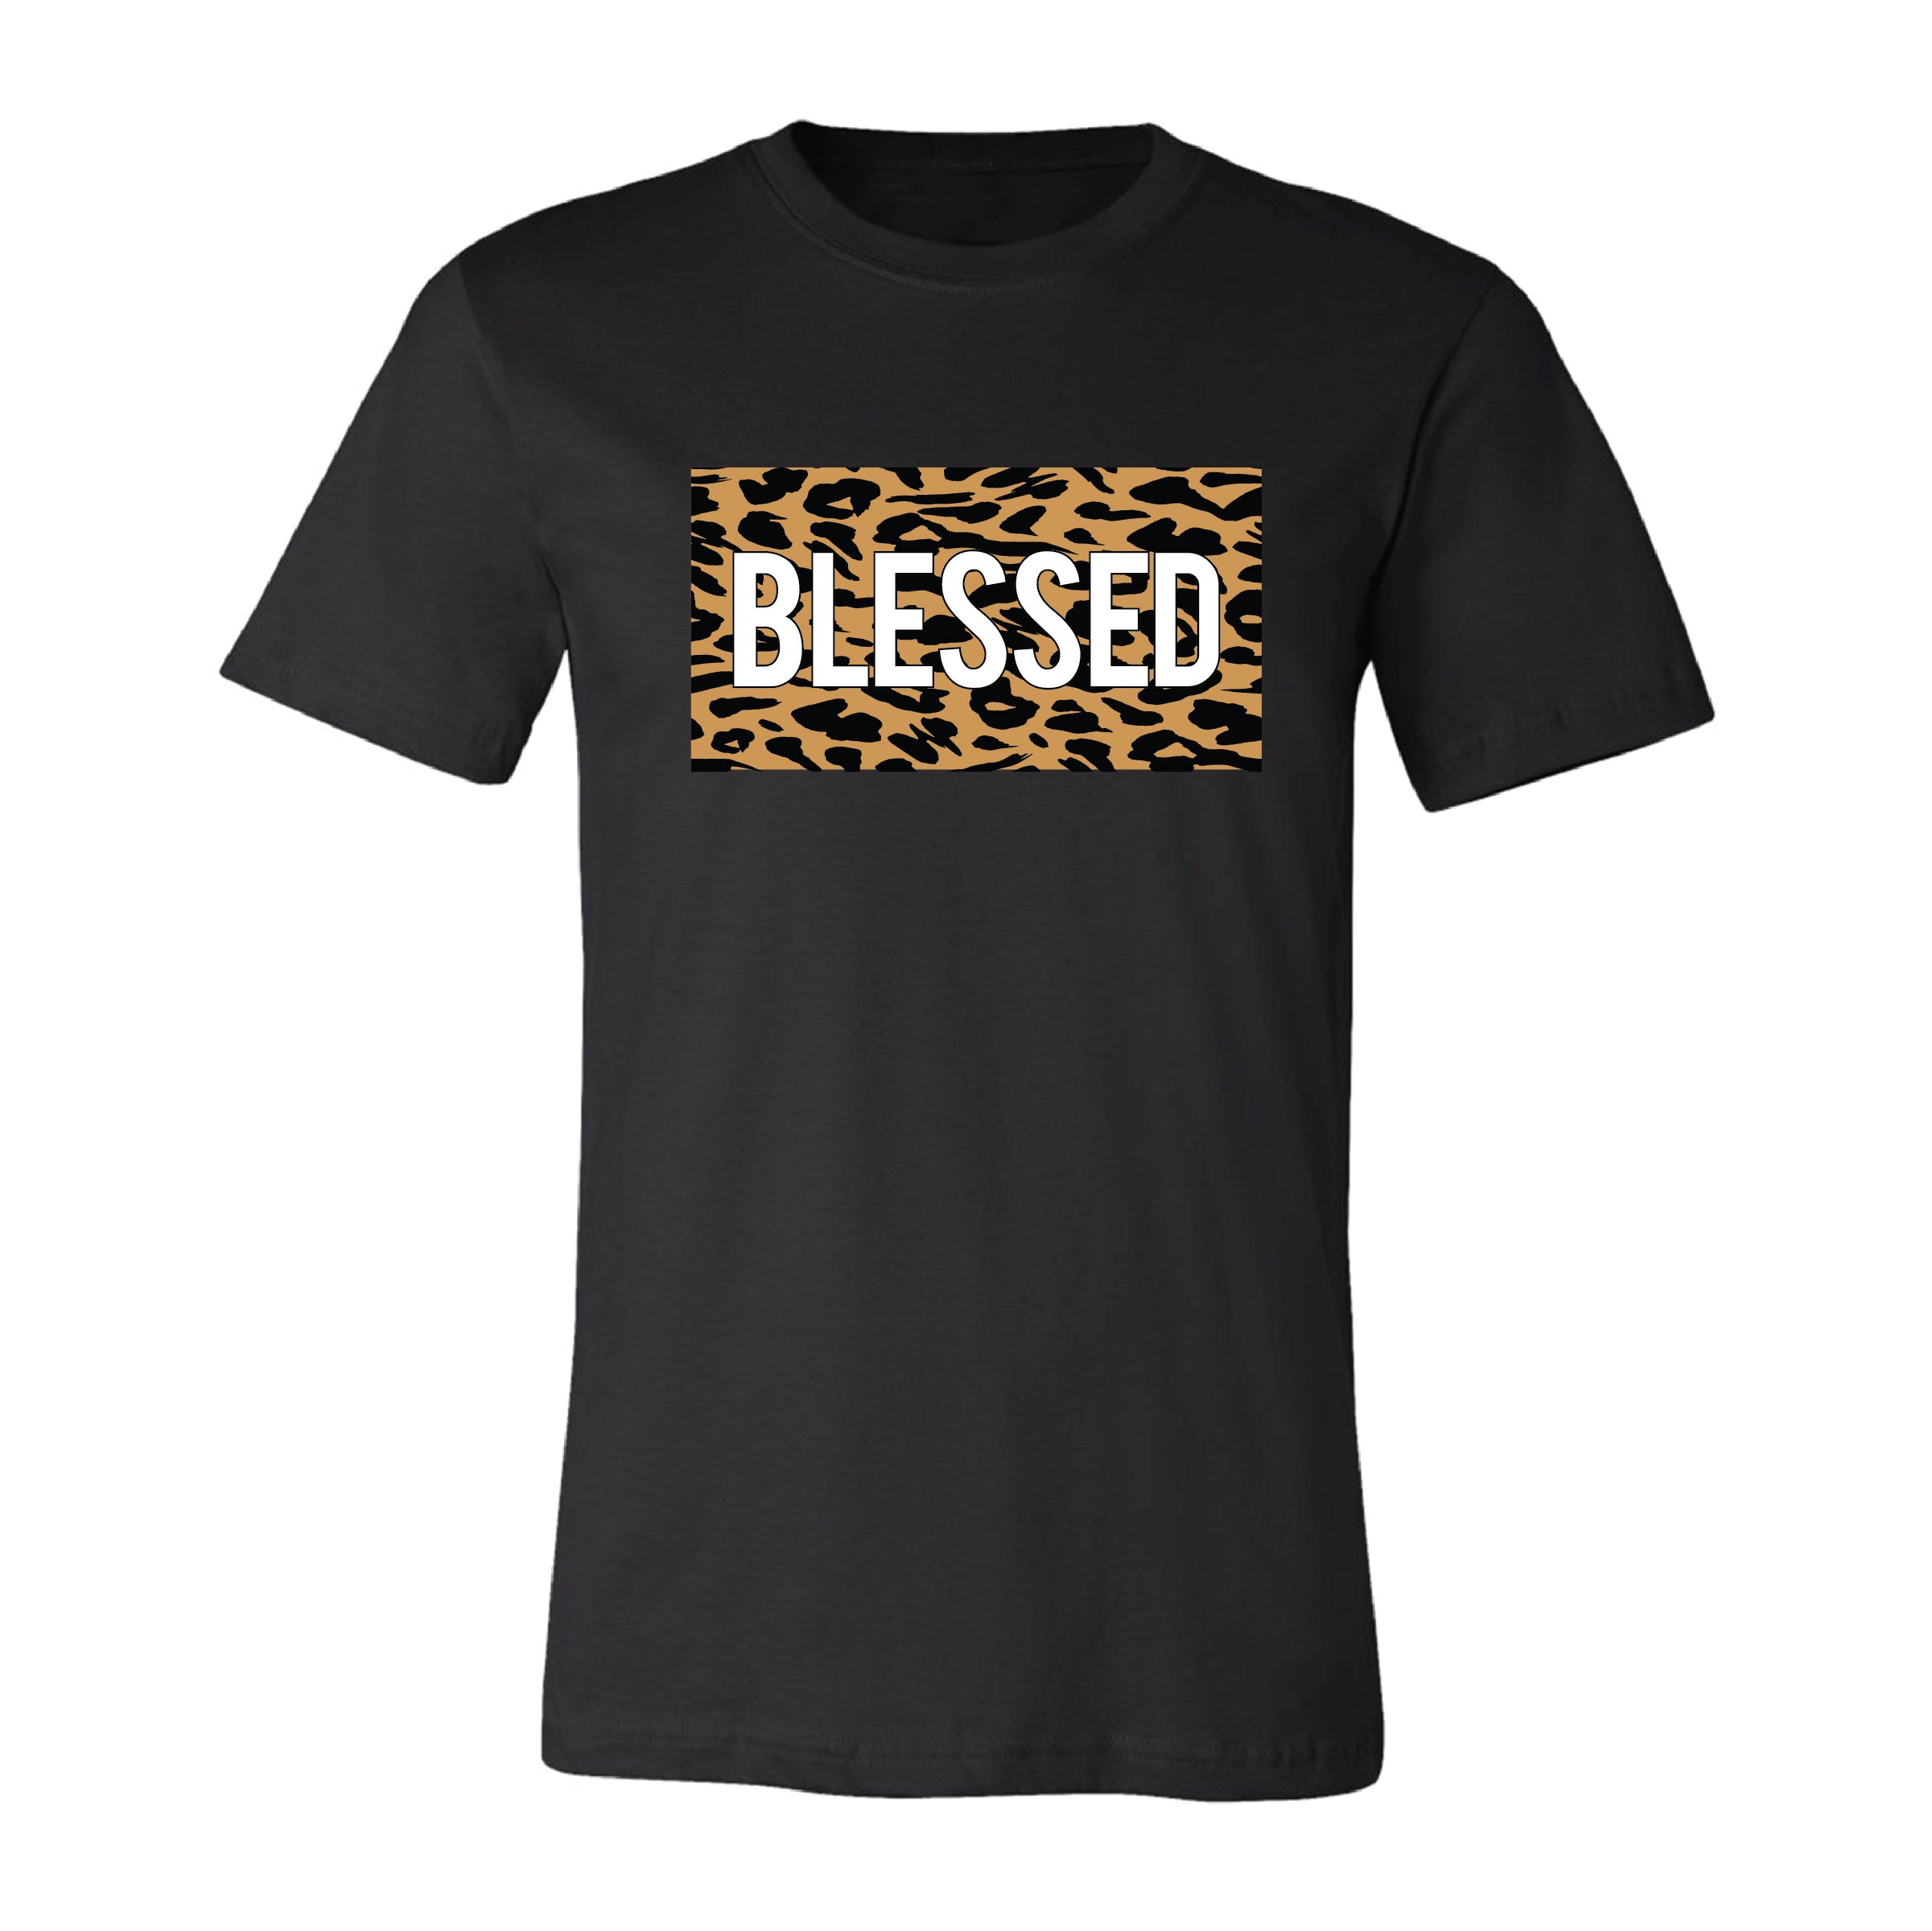 BLESSED Leopard T-Shirt